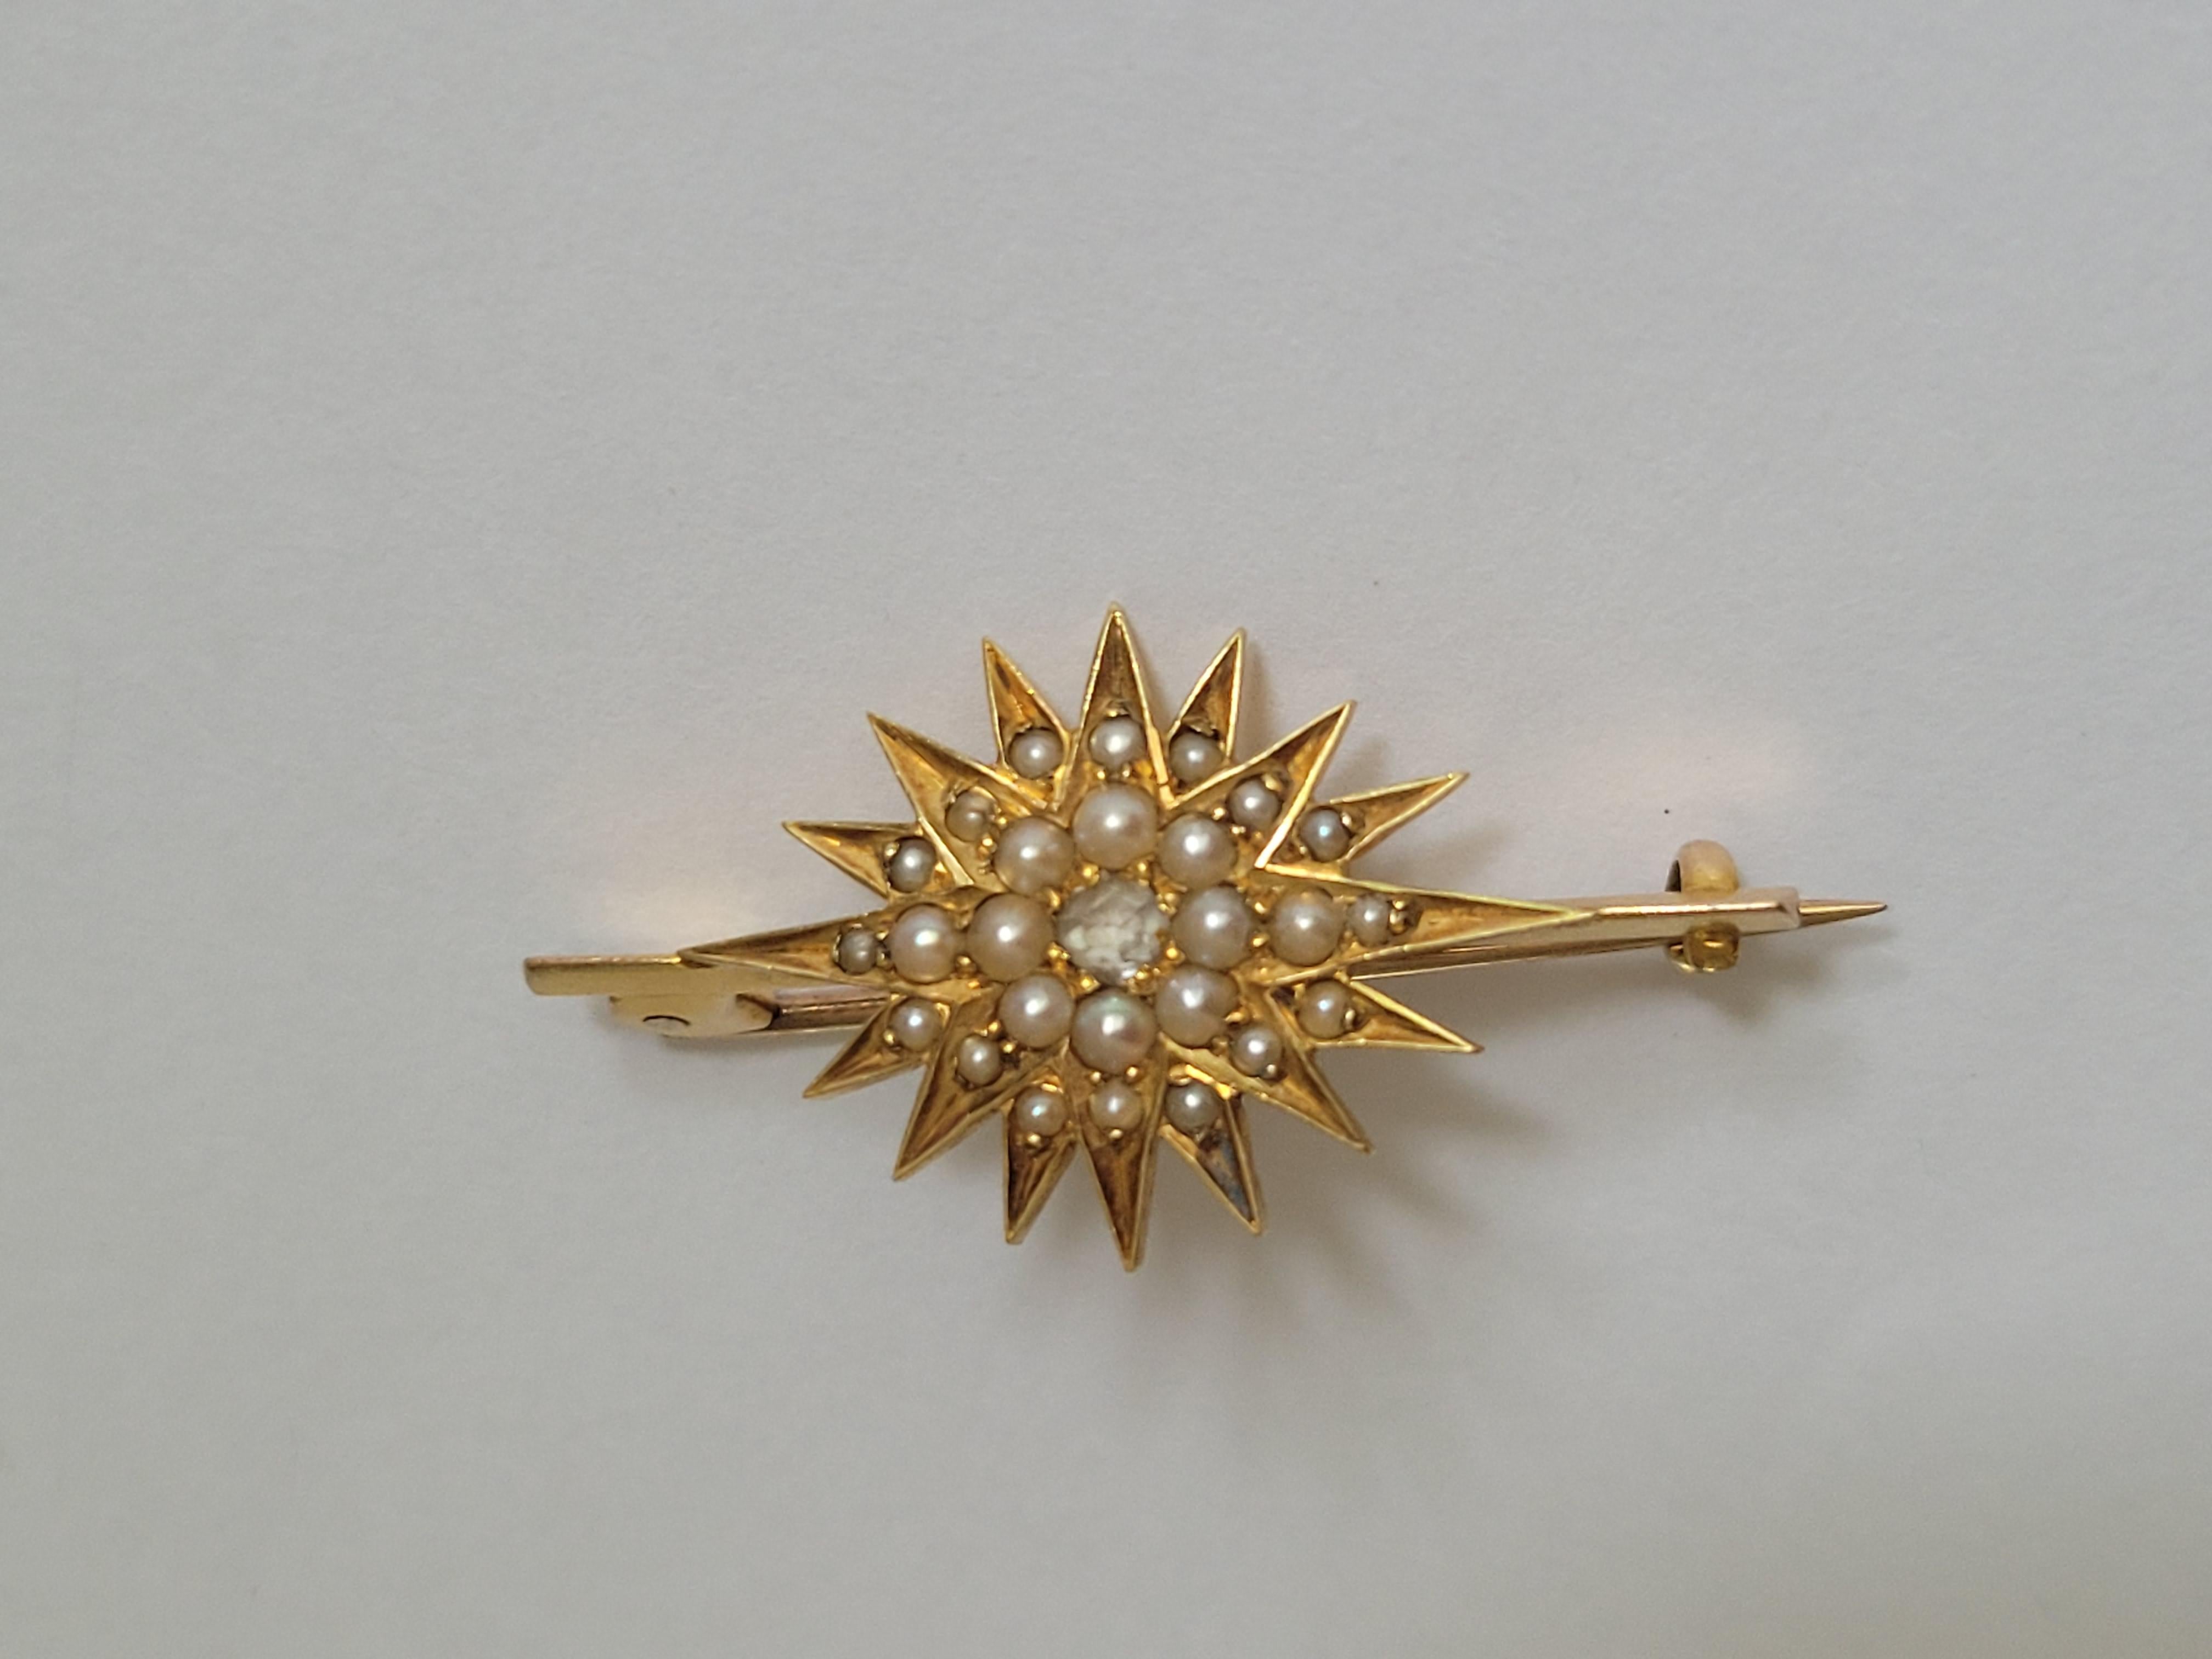 A Gorgeous Edwardian c.1900 18 Carat Gold, Rose cut Diamond and split Natural Pearl Starburst bar brooch. English origin.
Total length of the brooch 35mm.
Starburst 25mm or 1